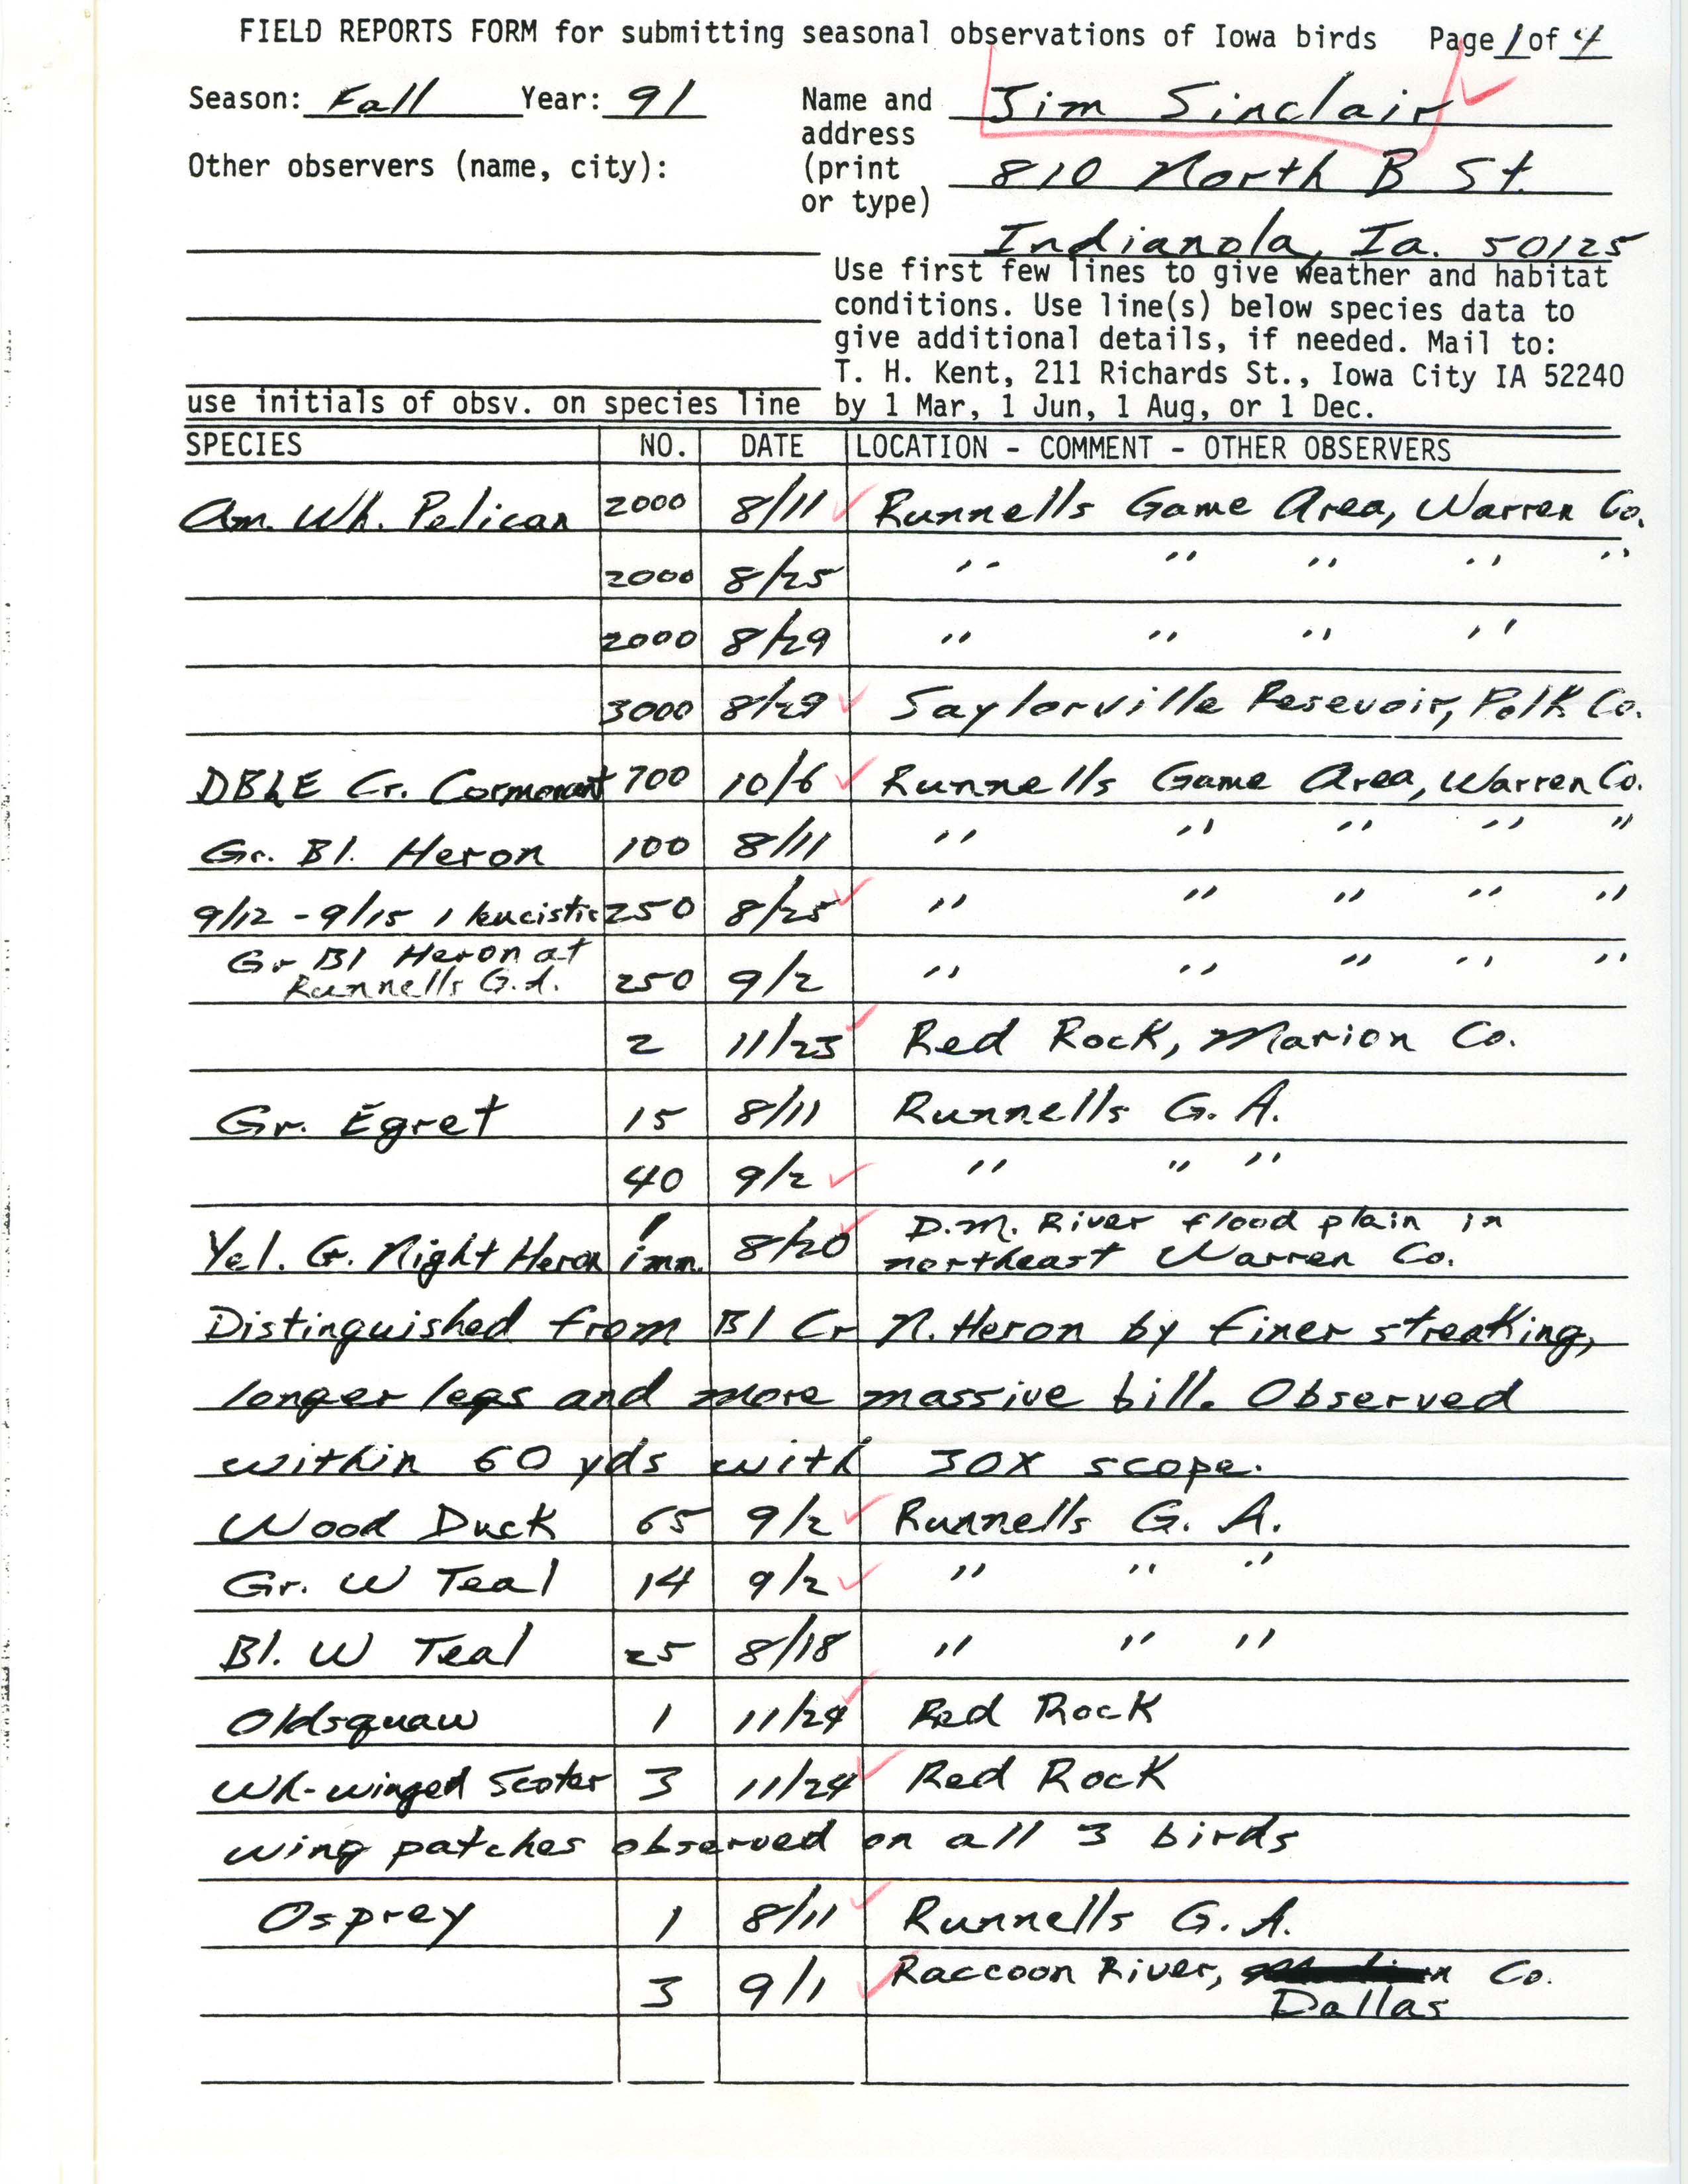 Field reports form for submitting seasonal observations of Iowa birds, Jim Sinclair, fall 1991